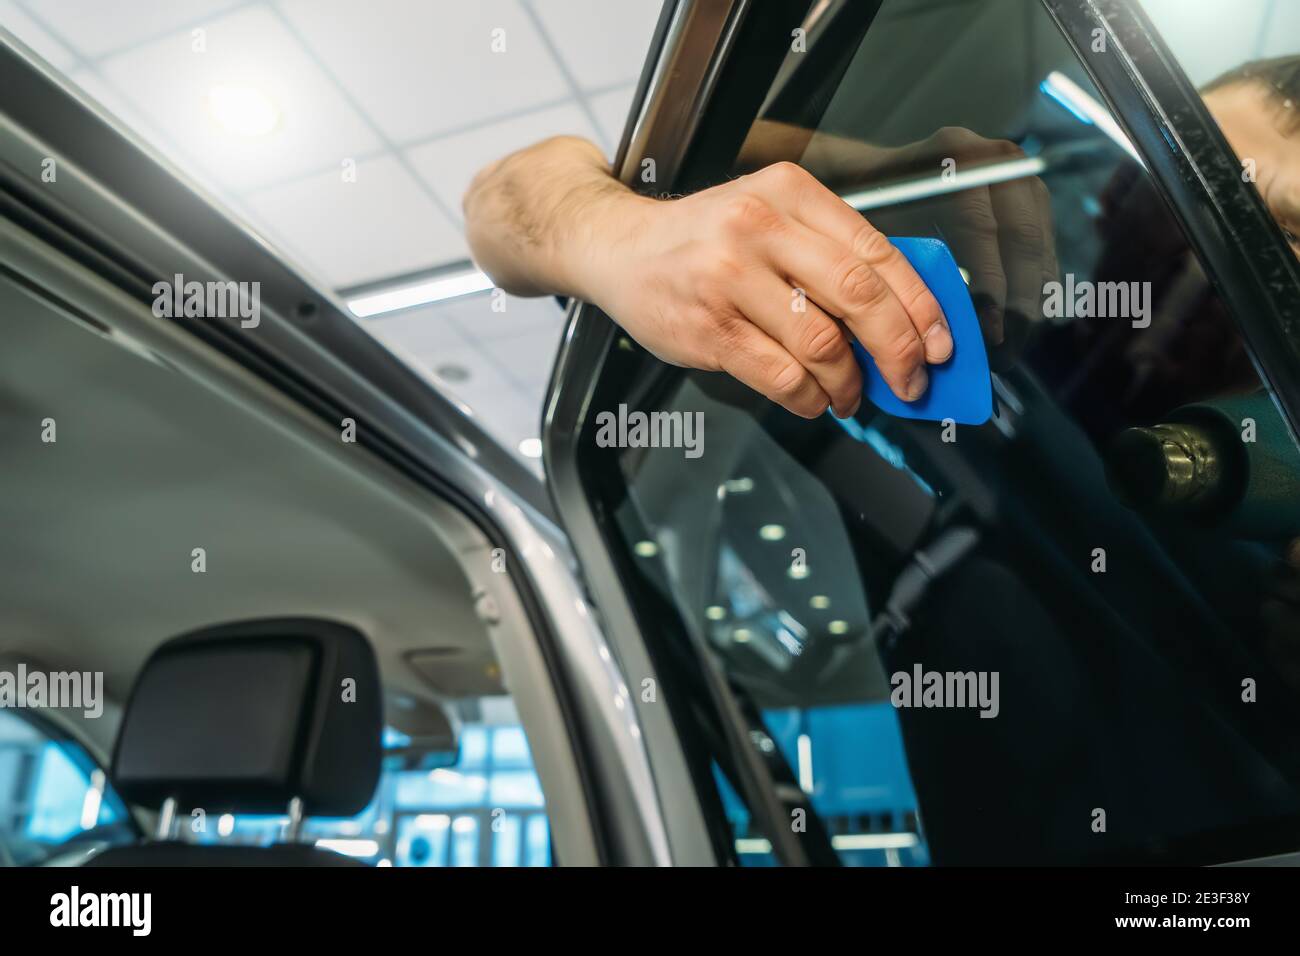 Car window tinting. Process of Installation window tint in Car Detailing Studio Garage by professional detailer. Stock Photo